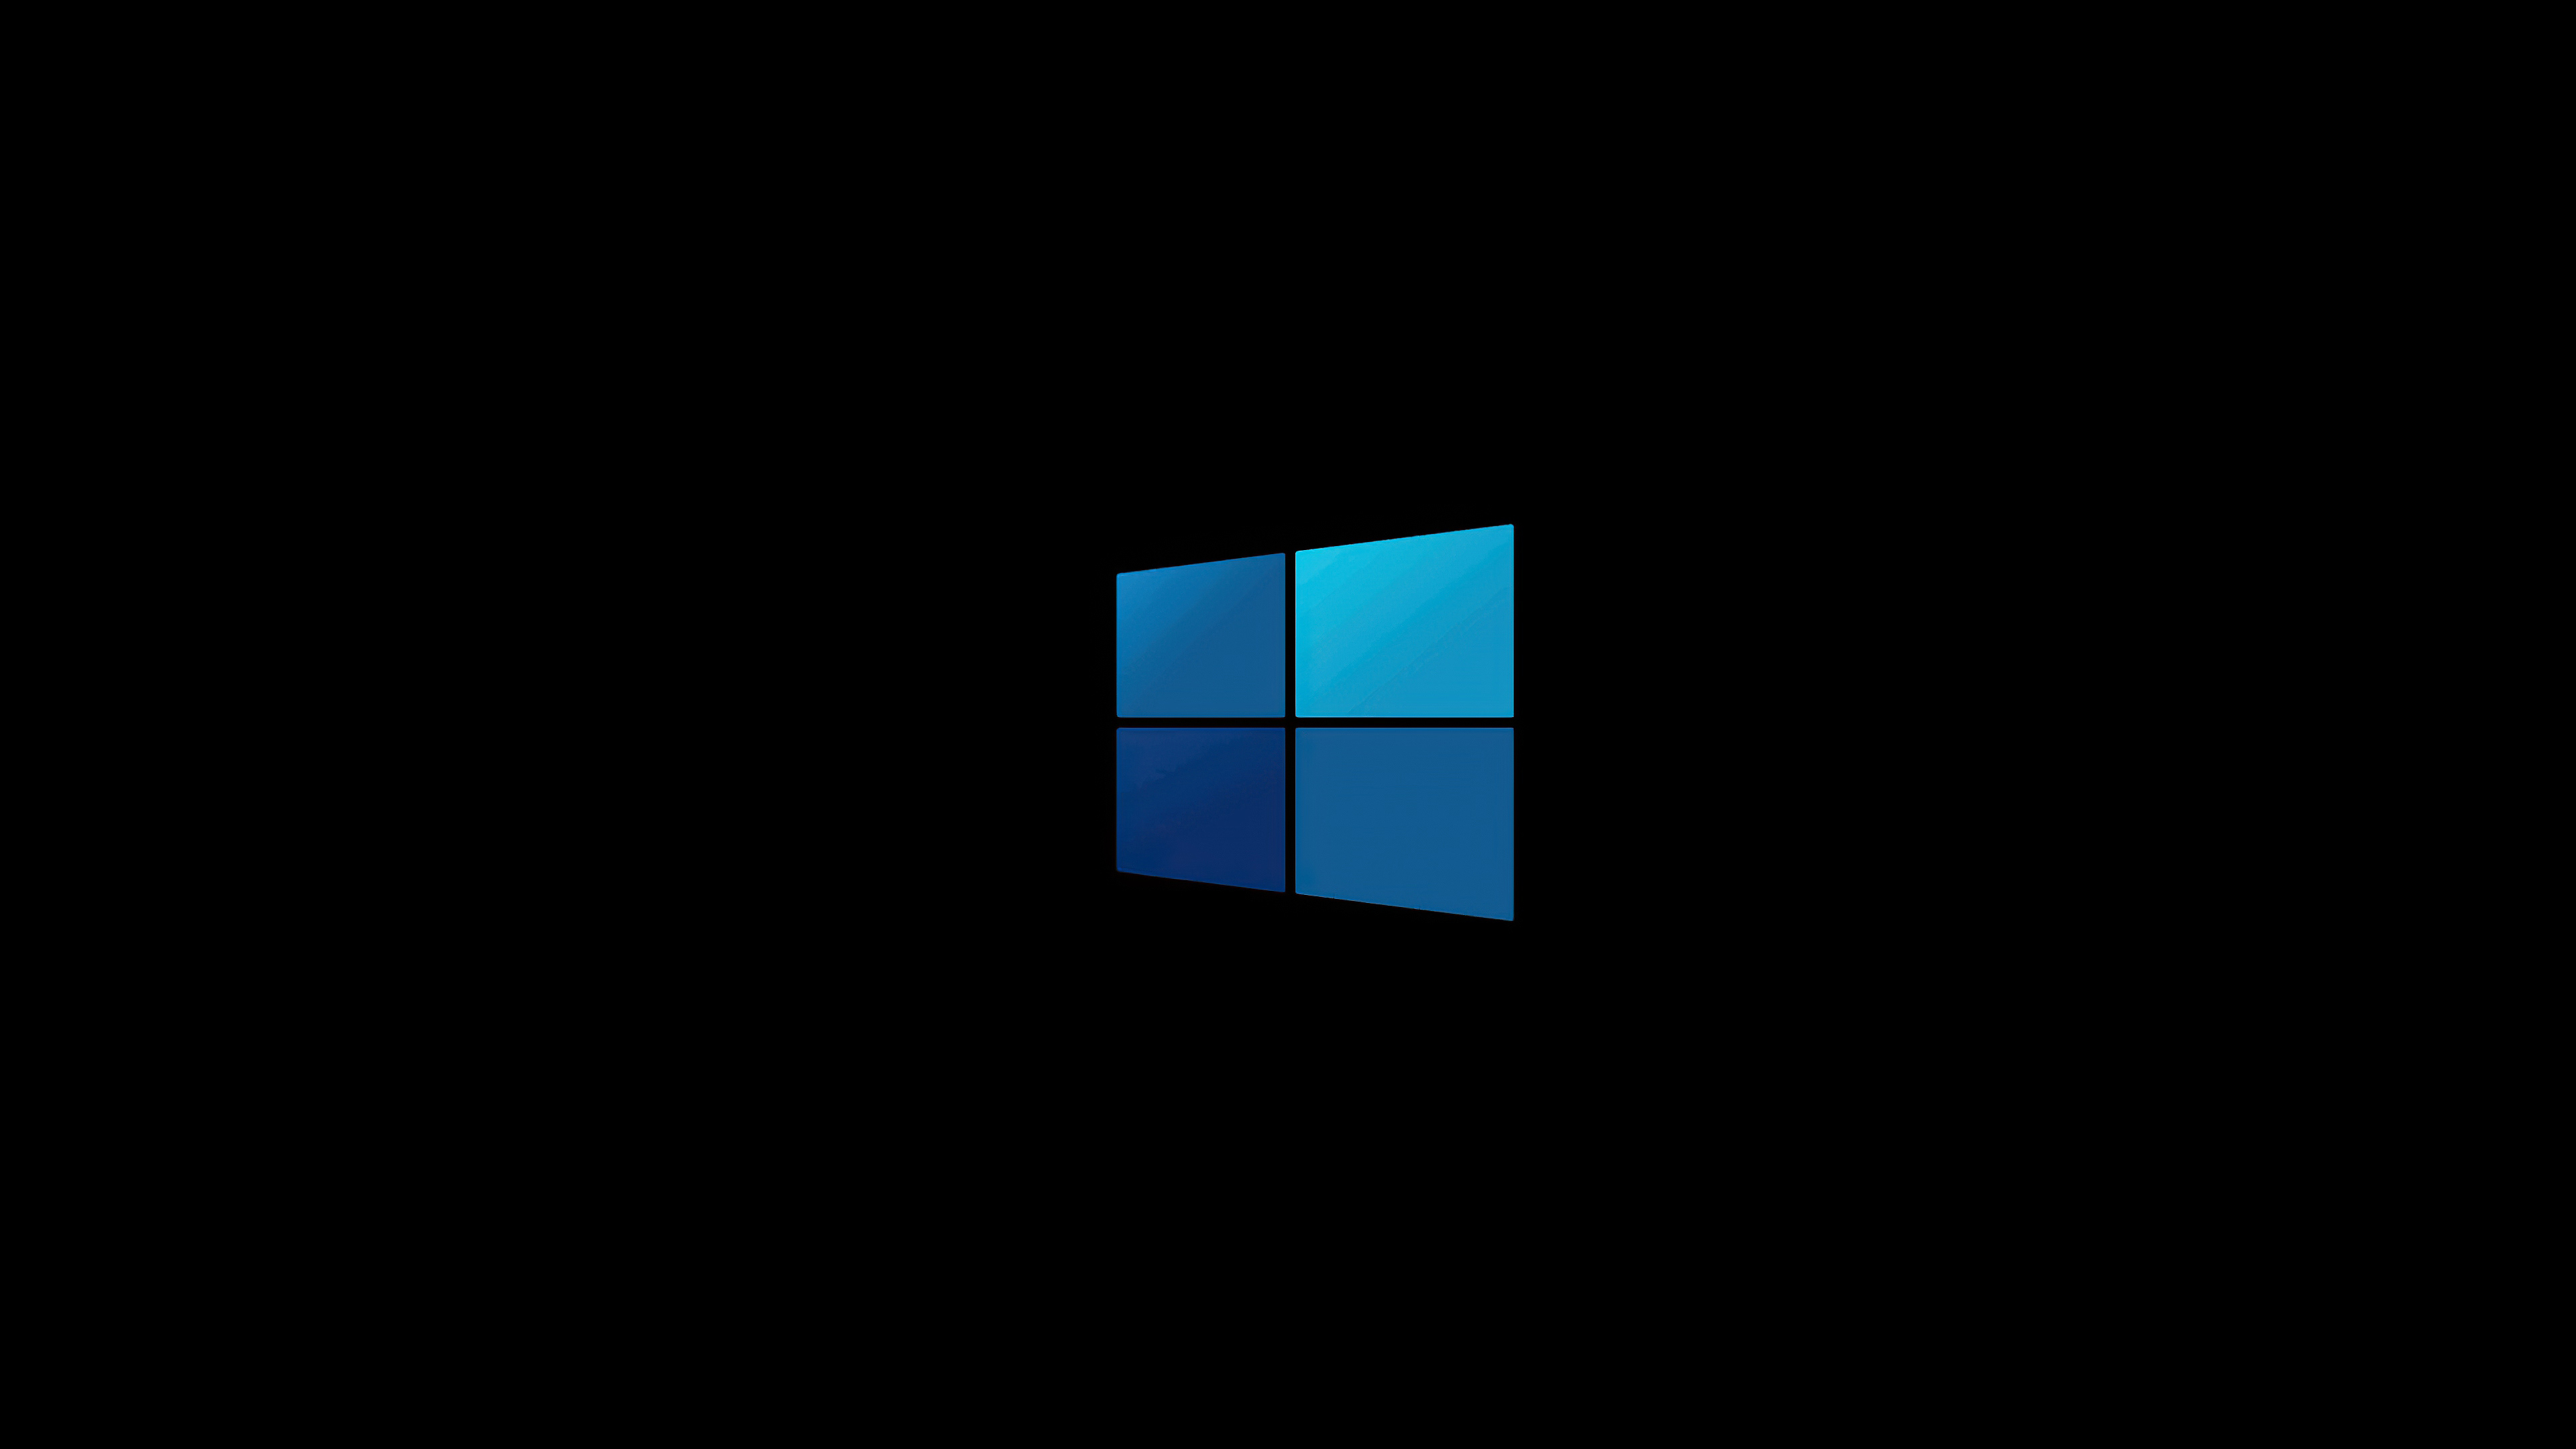 3840x2160 1366x768 Windows 10 Minimal Logo 4k 1366x768 Resolution HD 4k Wallpapers, Images, Backgrounds, Photos and Pictures